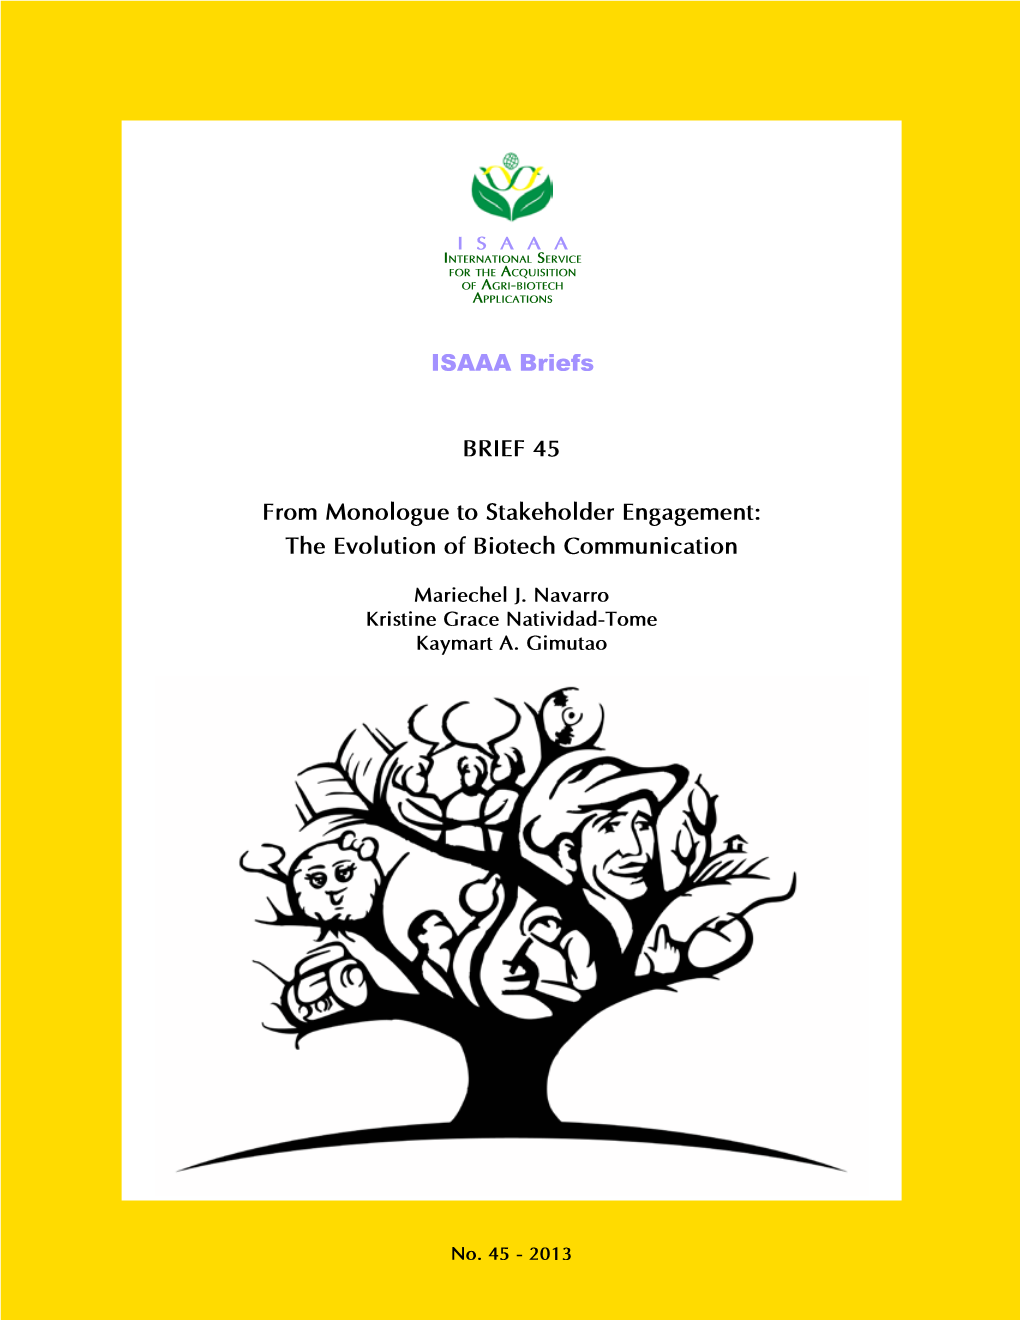 ISAAA Brief# 45: from Monologue to Stakeholder Engagement